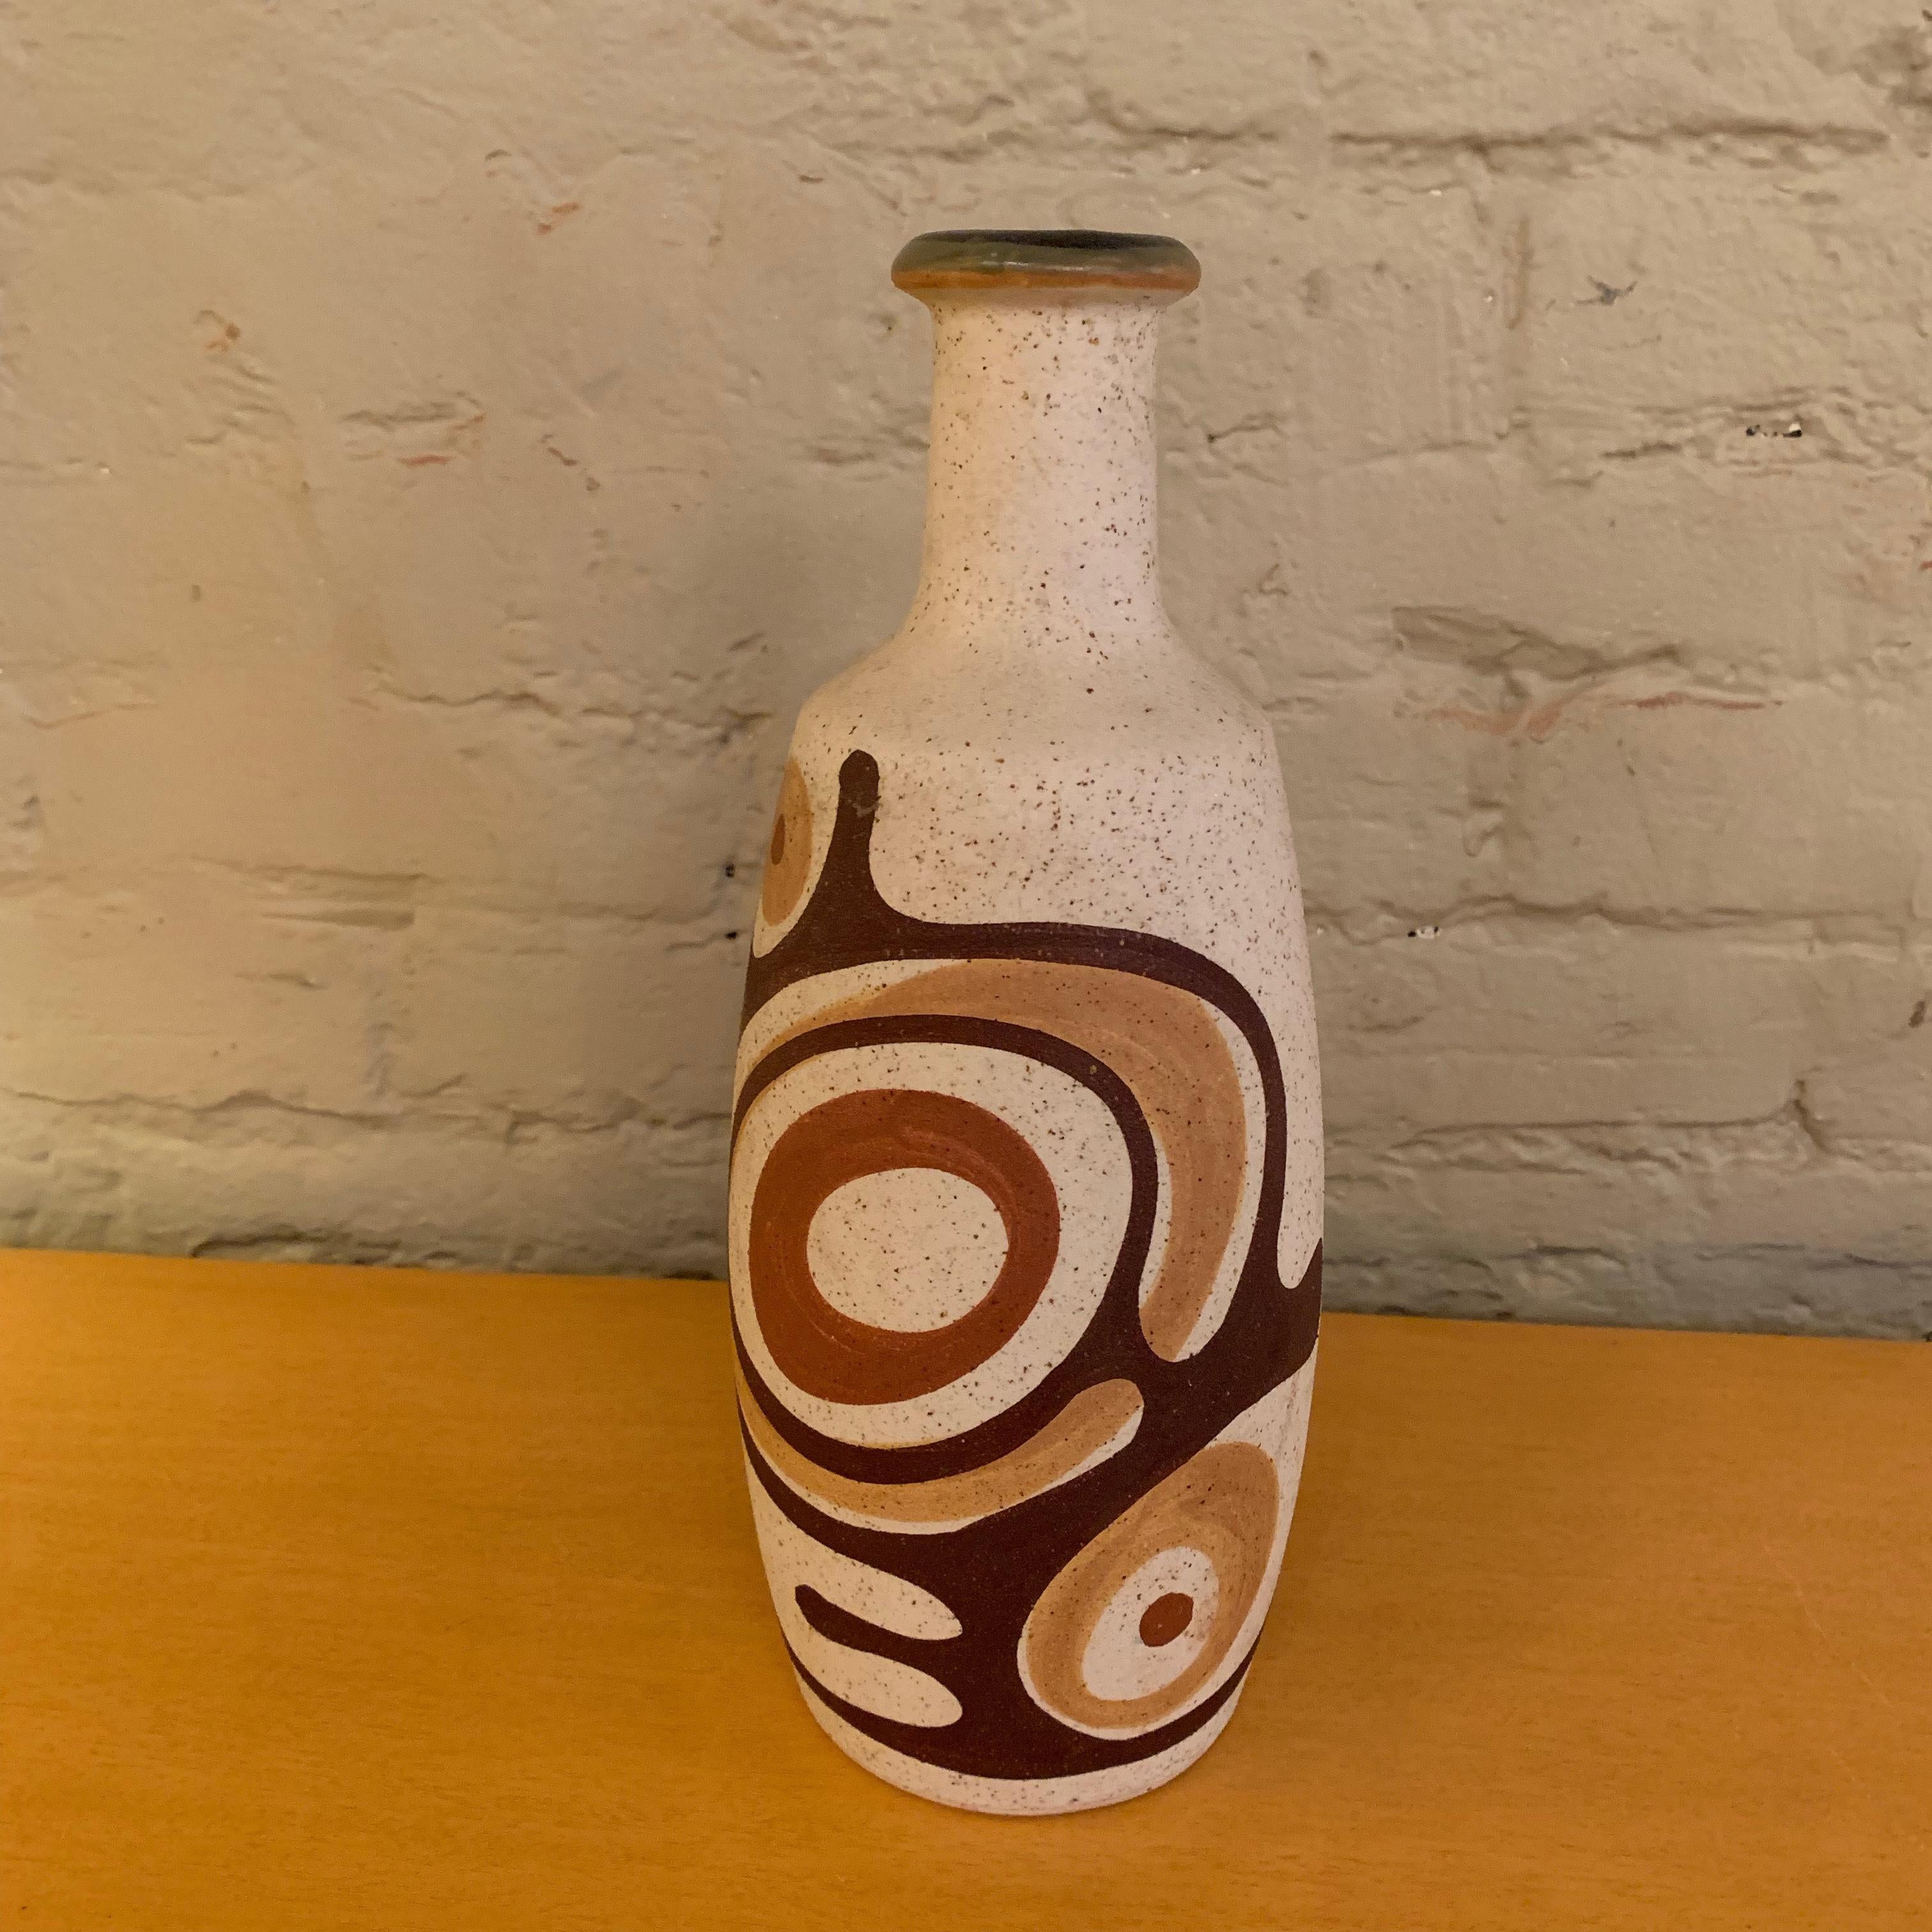 Tall, Mid-Century Modern, signed, studio, art pottery vase by Lapid, Tel Aviv Israel features a hand painted, abstract design.